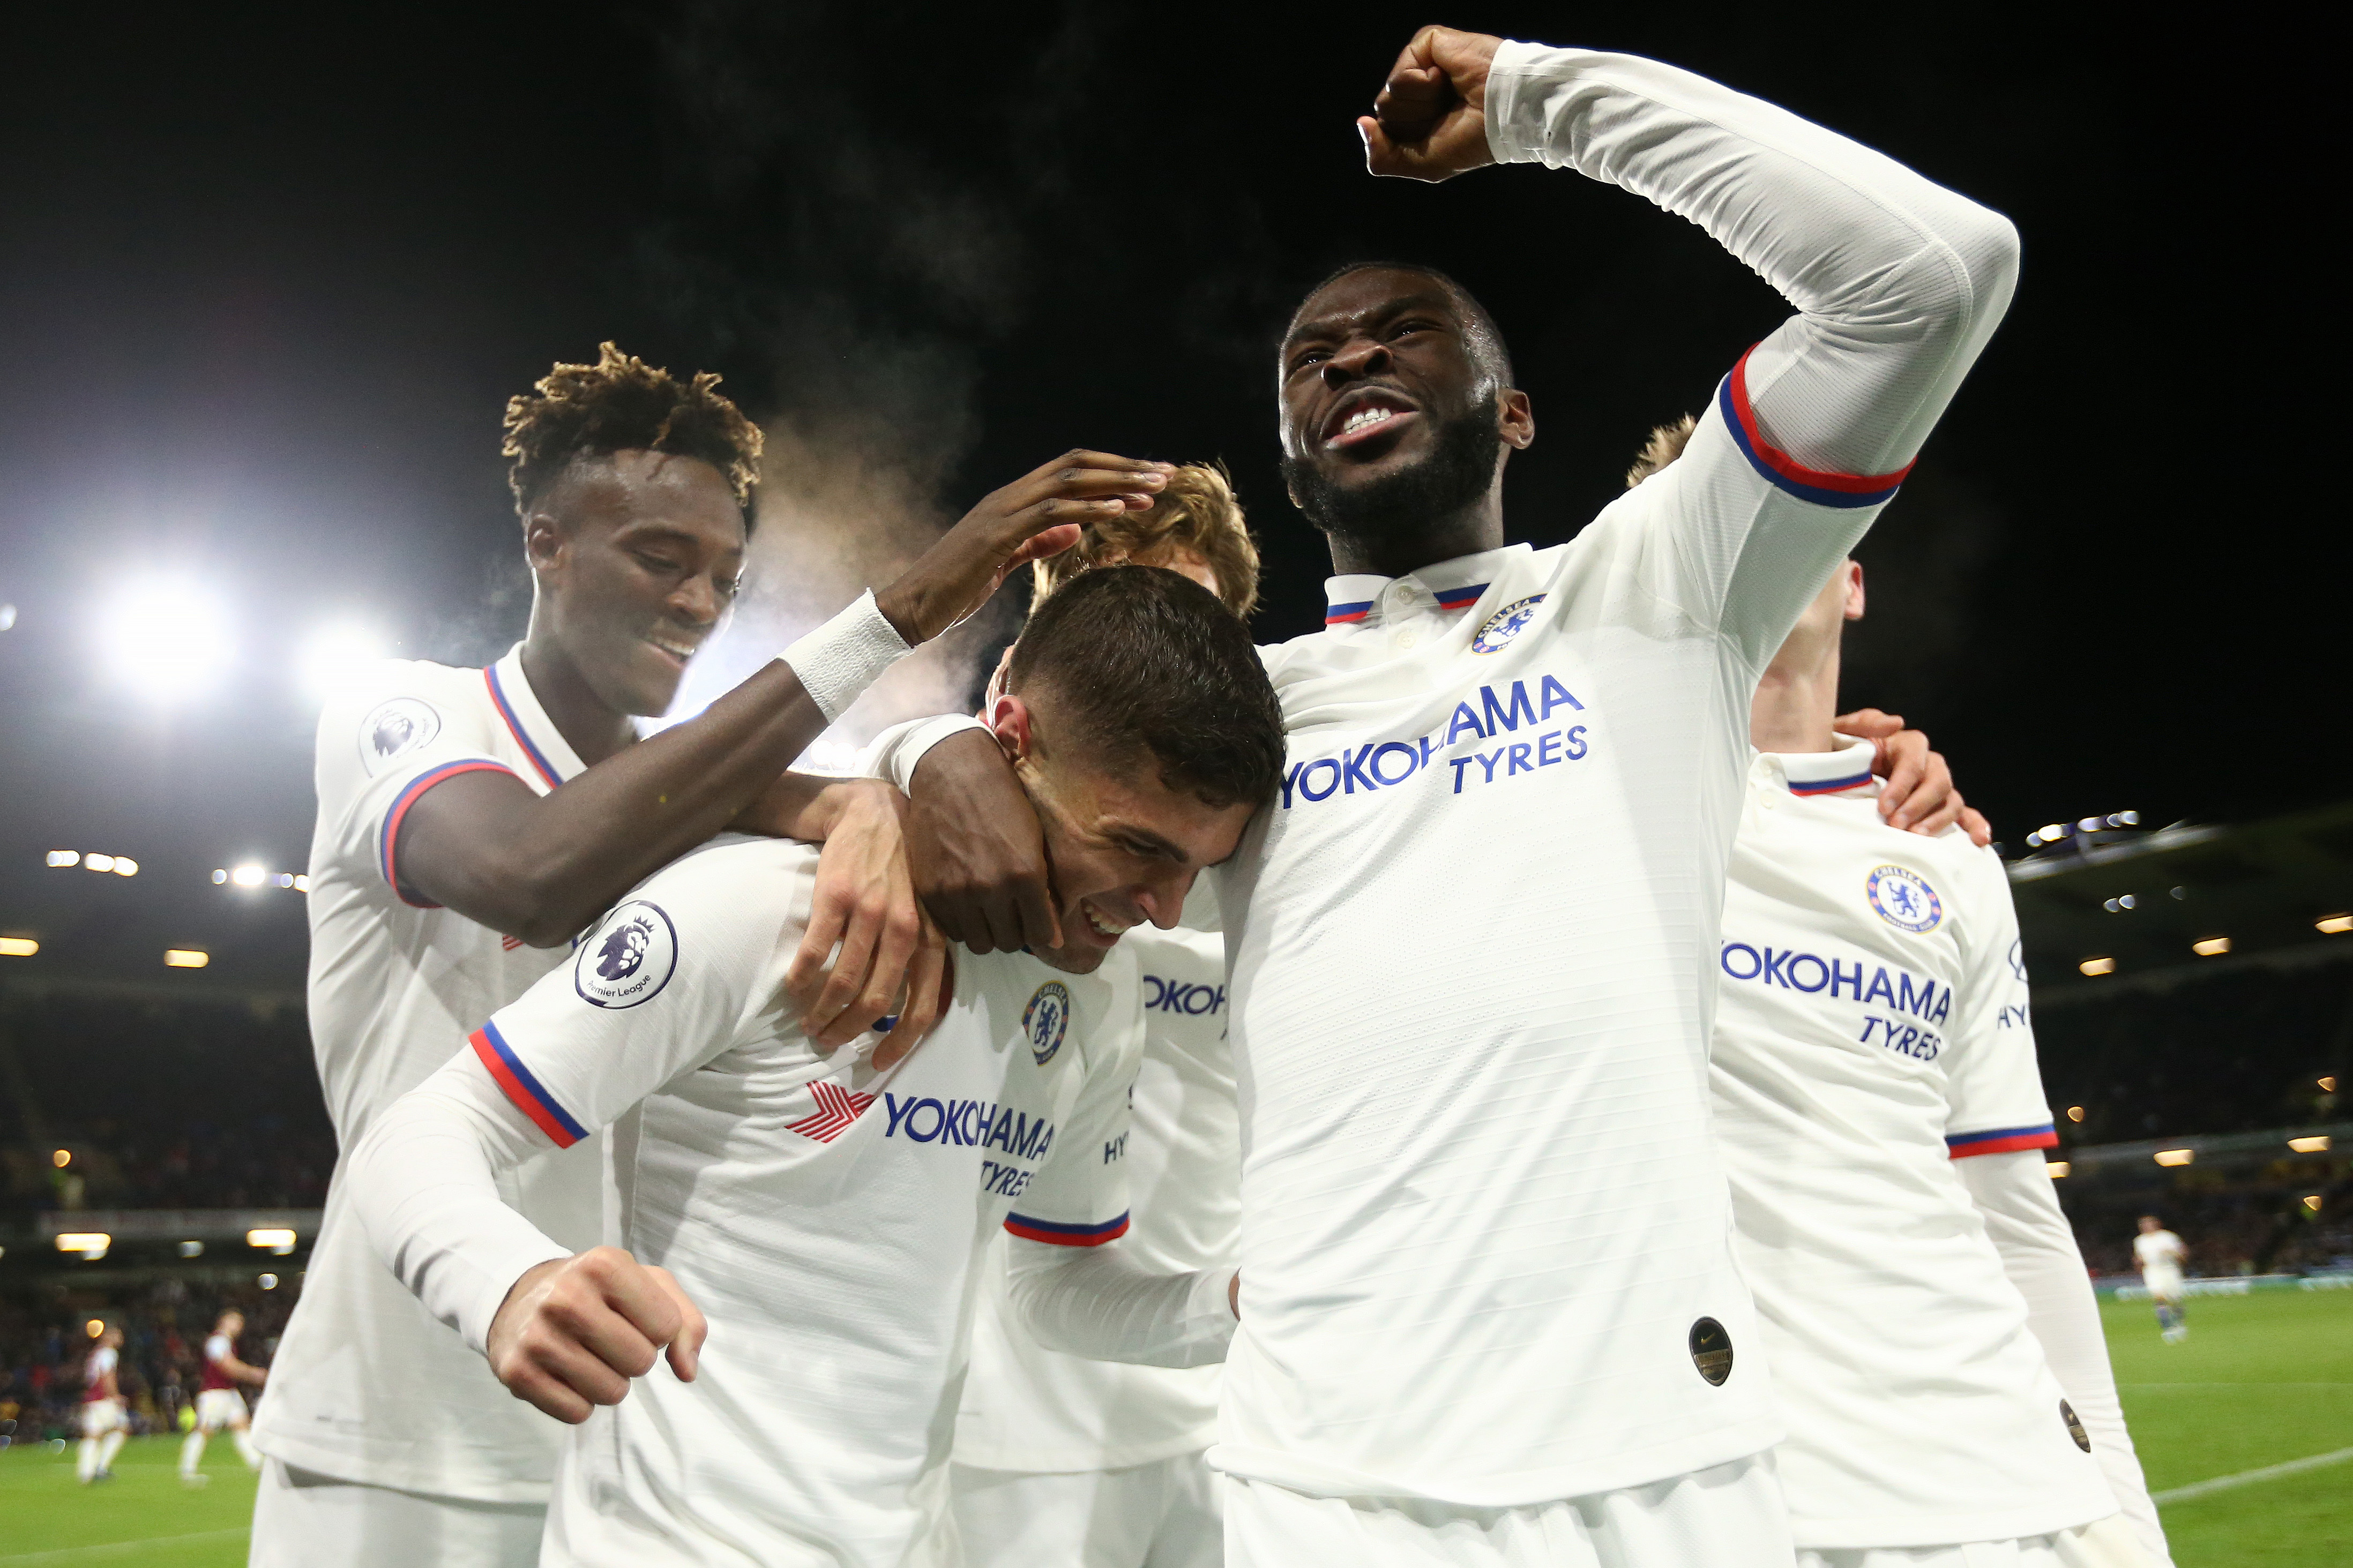 BURNLEY, ENGLAND - OCTOBER 26: Christian Pulisic of Chelsea celebrates with teammate Fikayo Tomori after scoring his sides third goal during the Premier League match between Burnley FC and Chelsea FC at Turf Moor on October 26, 2019 in Burnley, United Kingdom. (Photo by Jan Kruger/Getty Images)